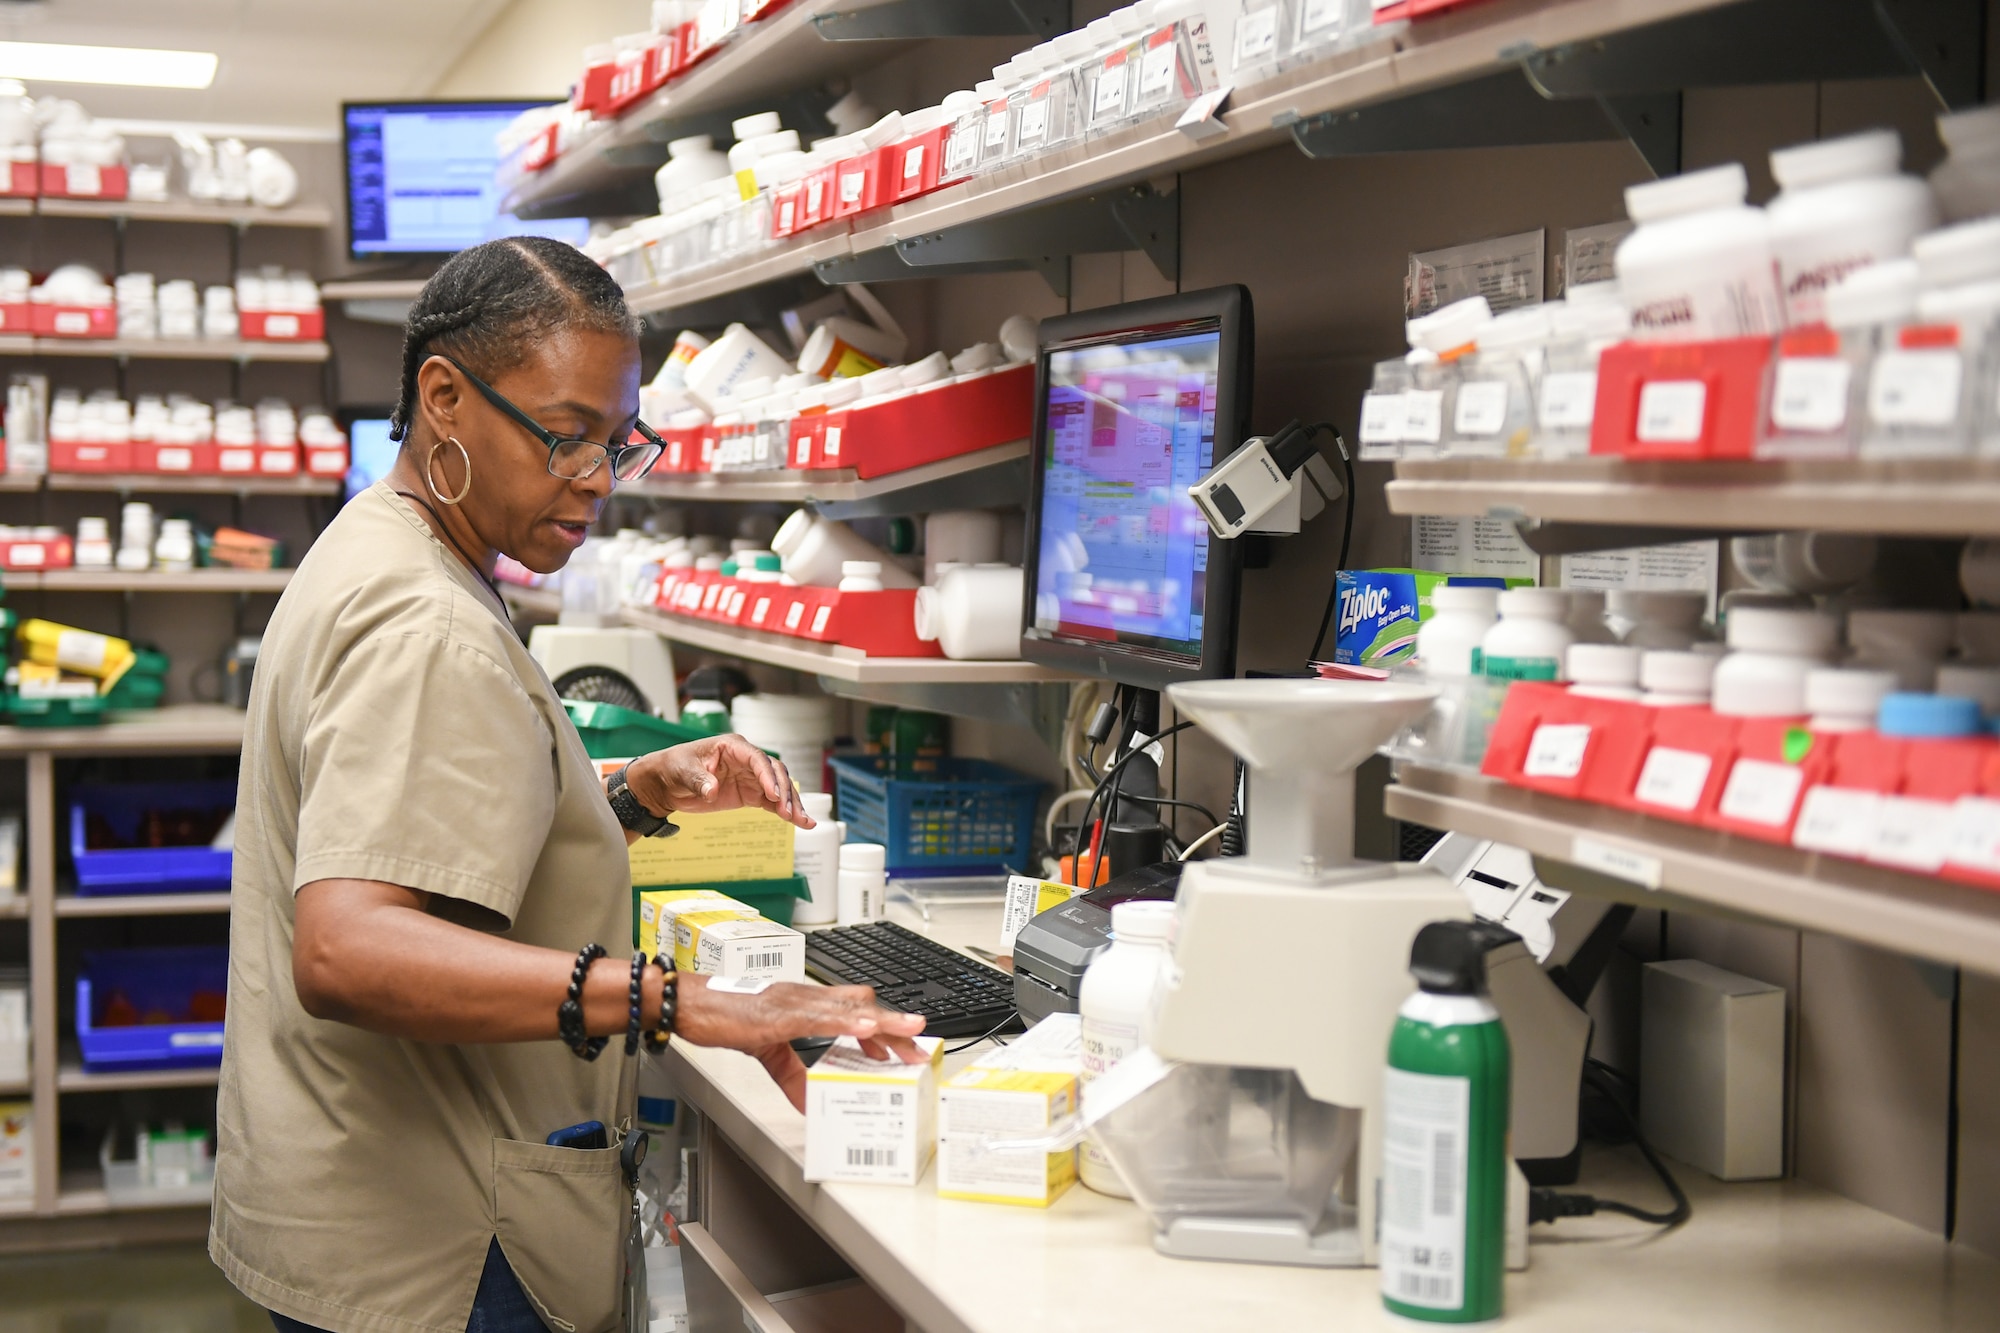 Crystal Coats, pharmacy technician, prepares prescriptions at the Staff Sgt. Derek F. Ramos Satellite Pharmacy located inside the AAFES Base Exchange at Hill Air Force Base, Utah, July 10, 2019. (U.S. Air Force photo by Cynthia Griggs)